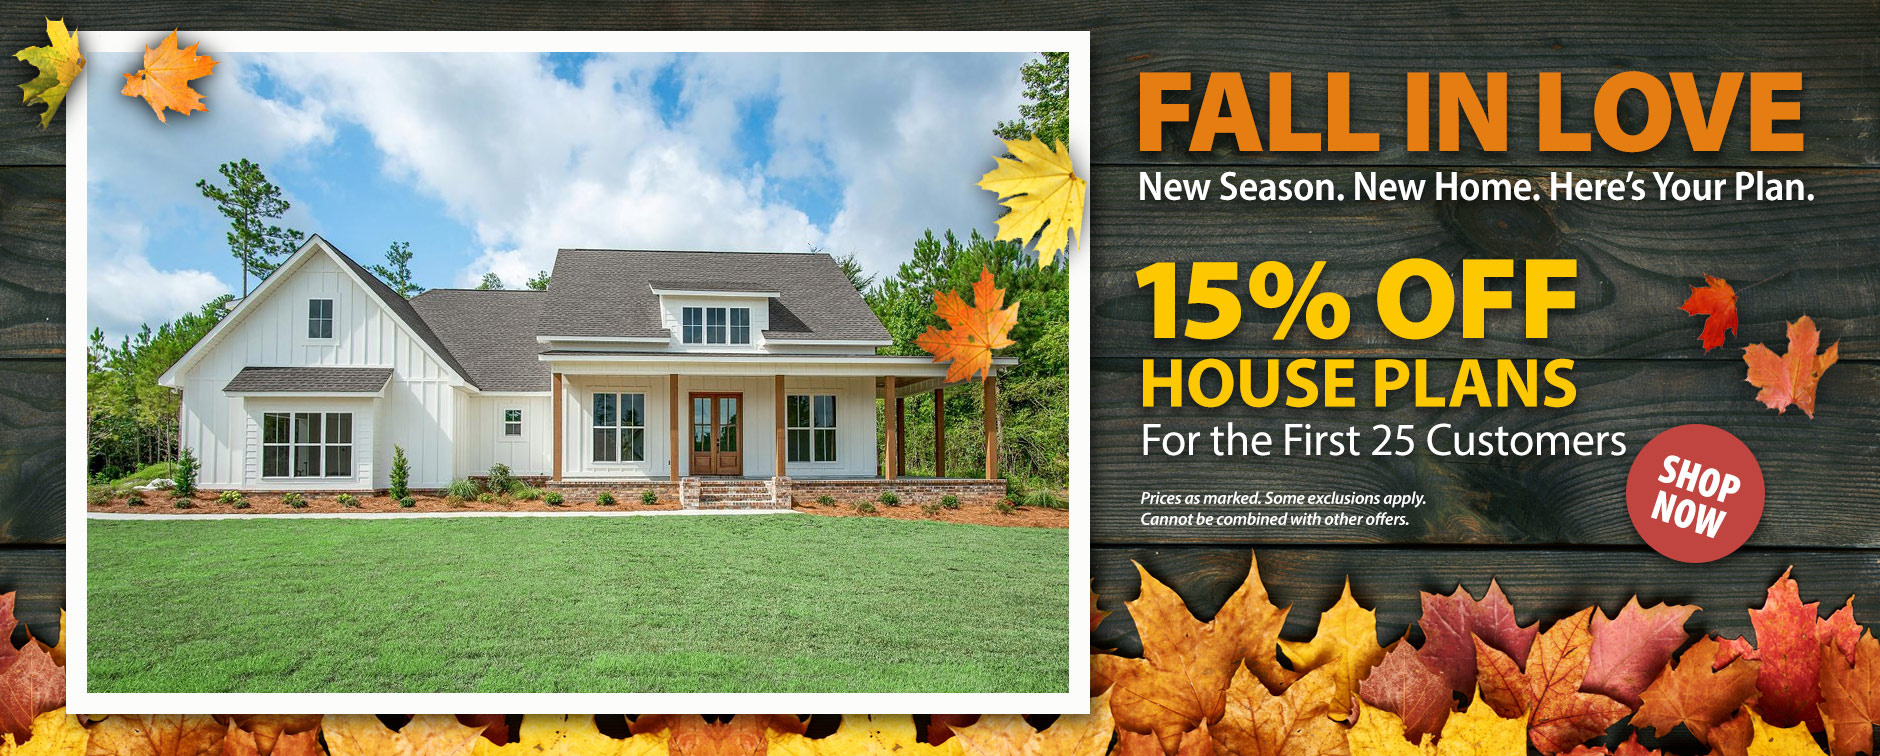 House Plan Sale - 15% Off Floor Plans for the First 25 Customers